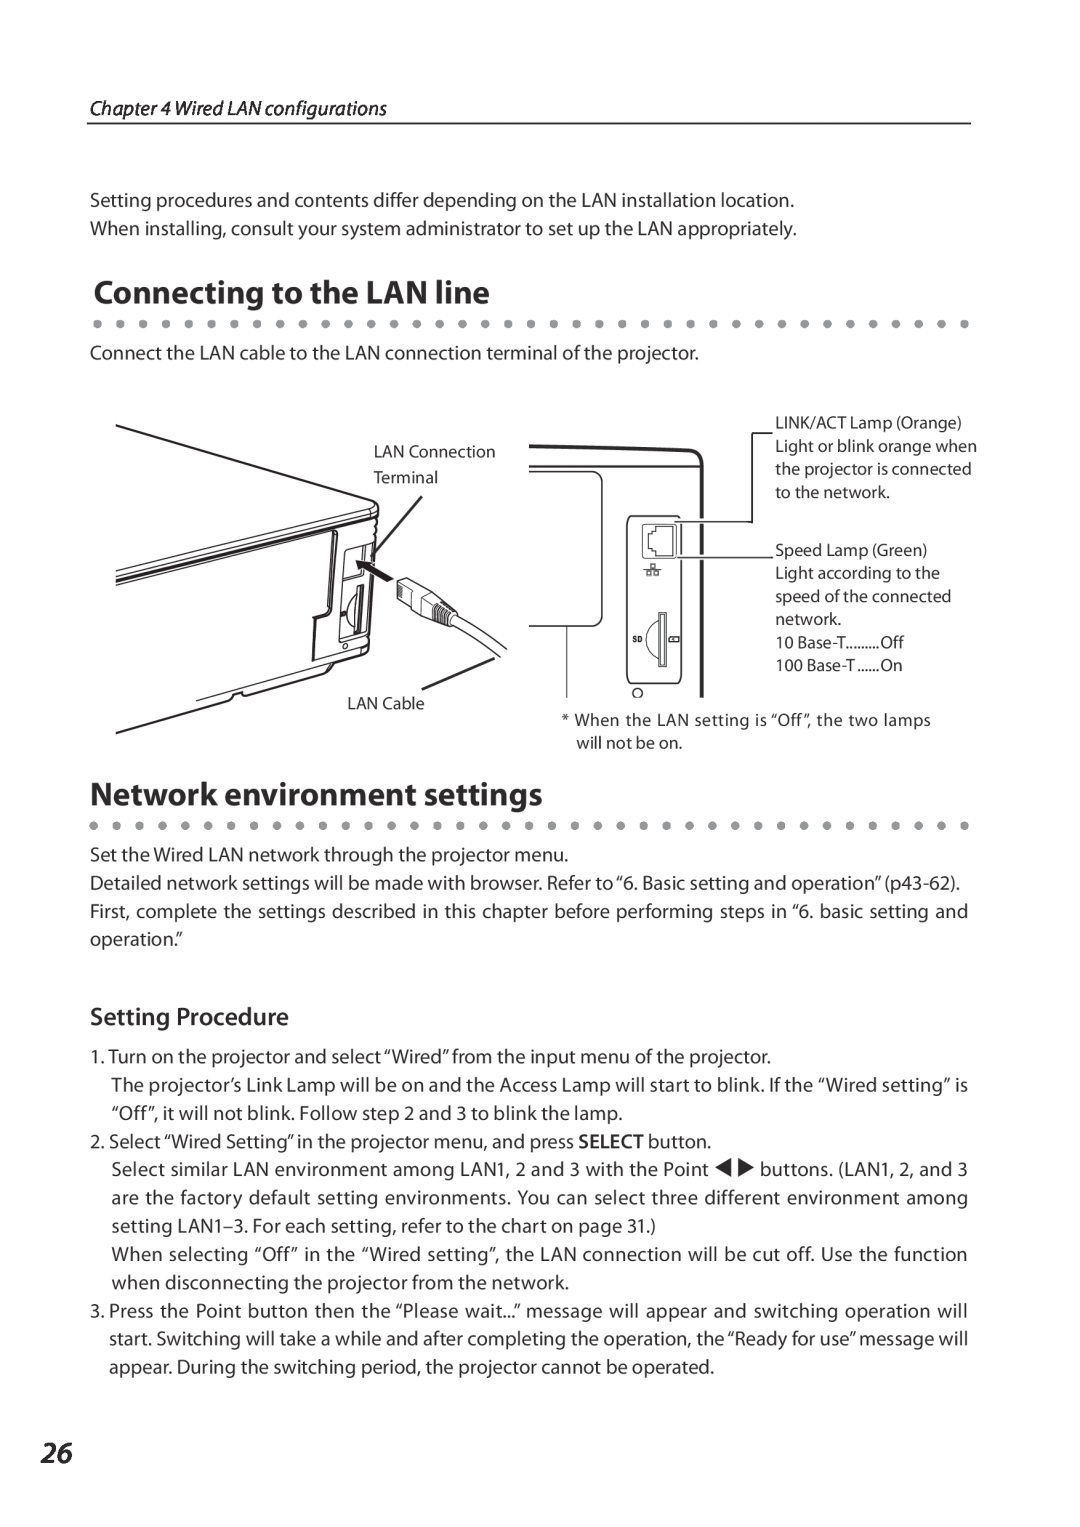 Eiki QXXAVC922---P Connecting to the LAN line, Network environment settings, Setting Procedure, Wired LAN configurations 